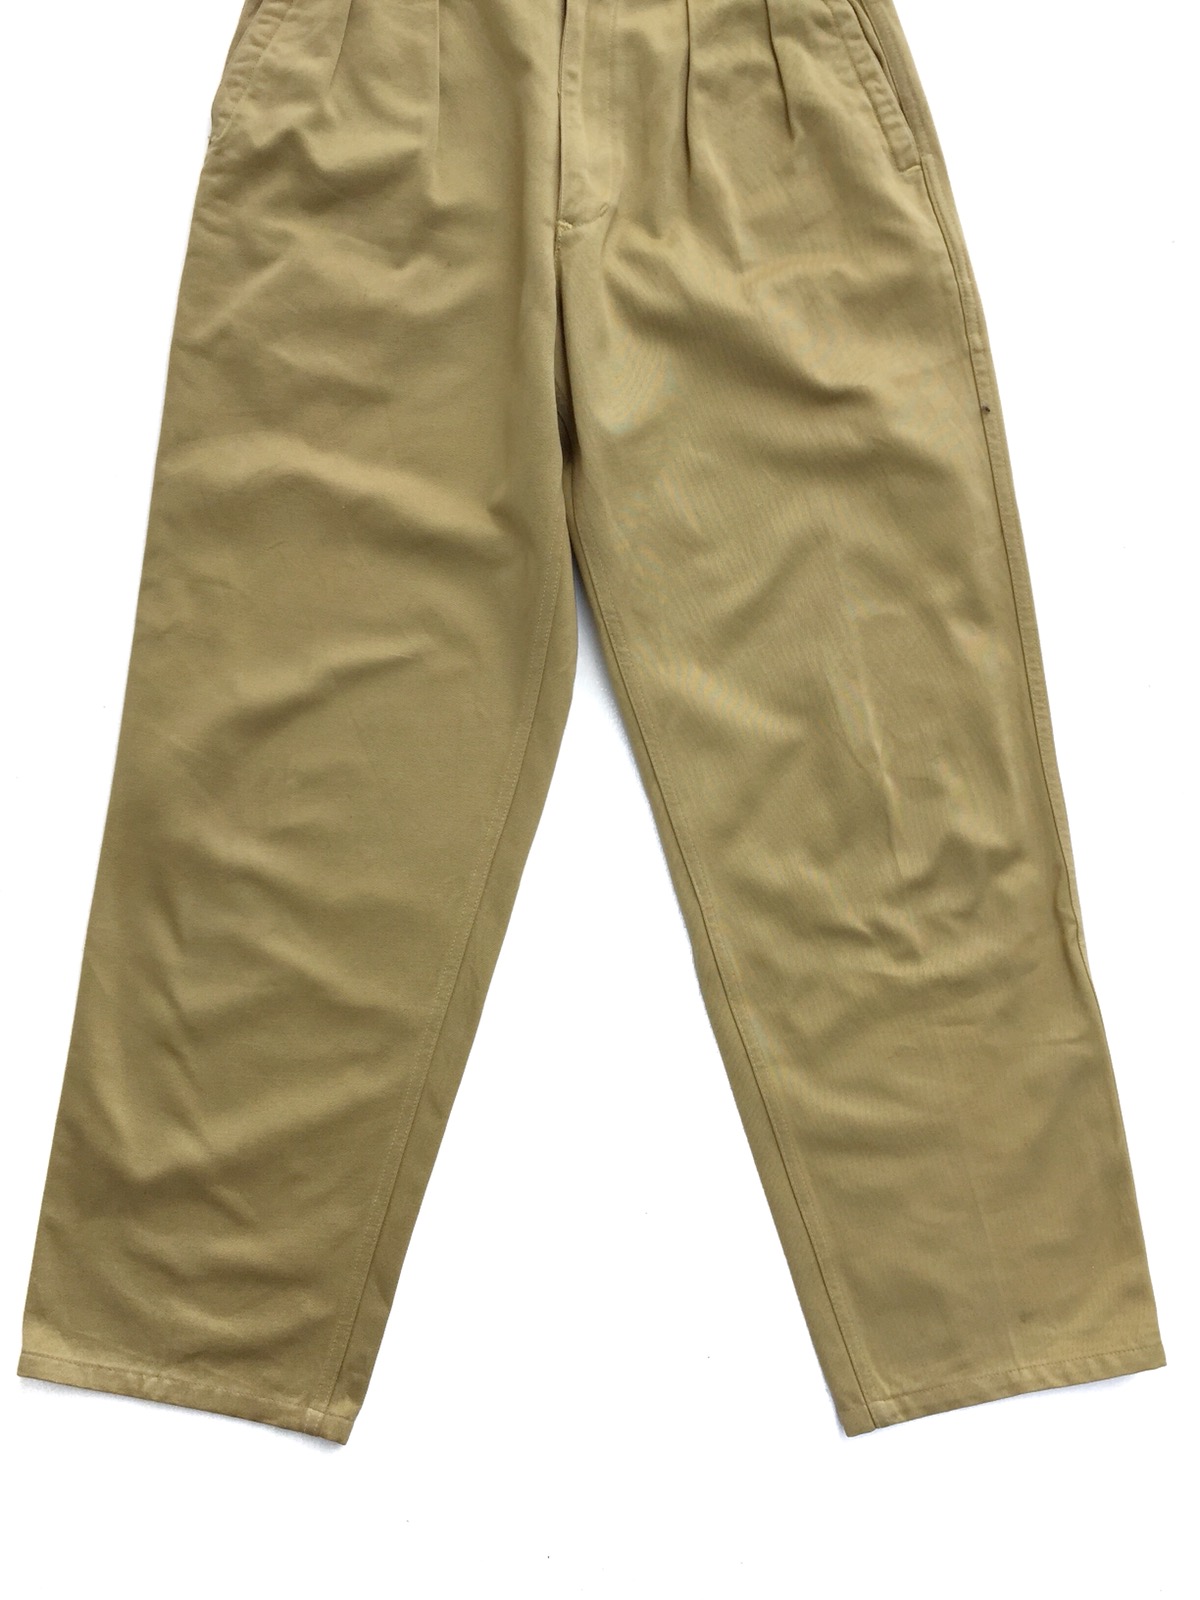 Nigel Cabourn Military Army Design Baggy Trousers Pants - 5